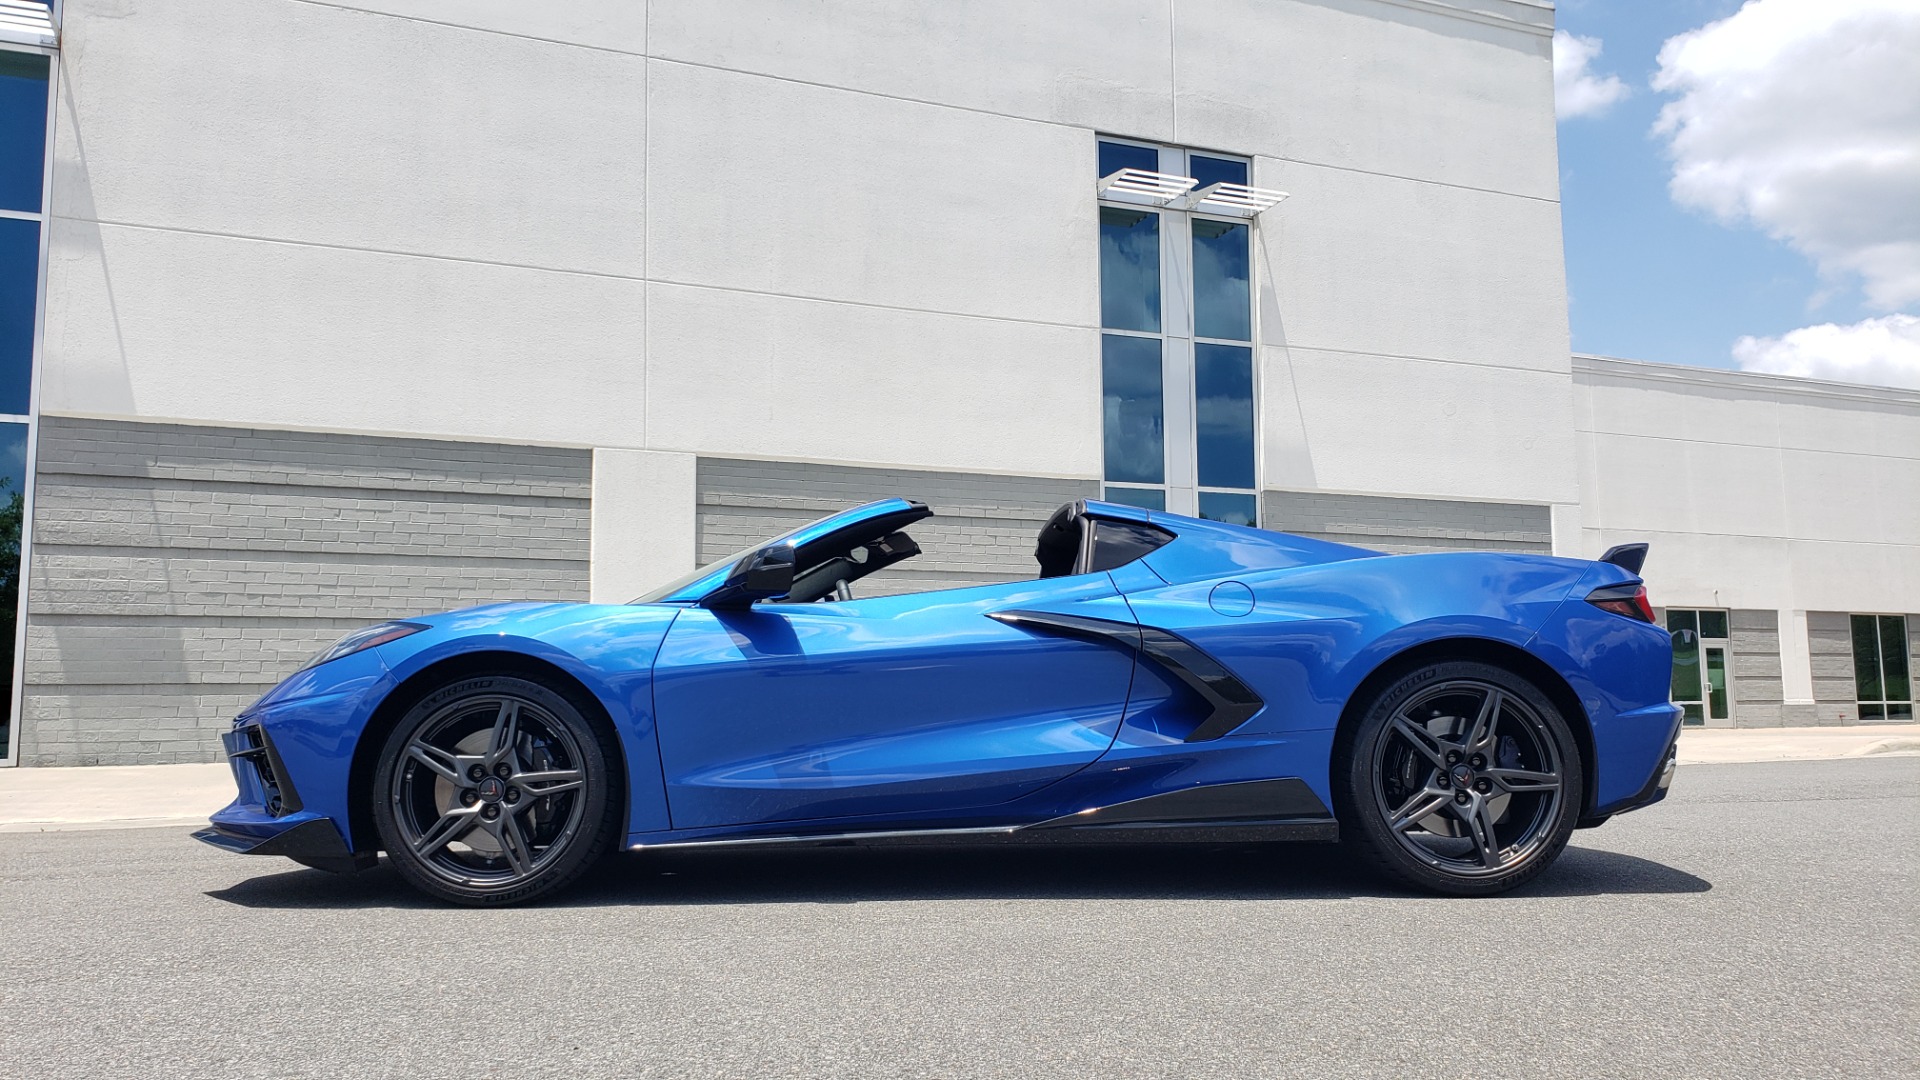 Used 2020 Chevrolet CORVETTE C8 STINGRAY COUPE 2LT / PERF & Z51 PKG / NAV / BOSE / 8-SPD AUTO / REARVIEW for sale Sold at Formula Imports in Charlotte NC 28227 13